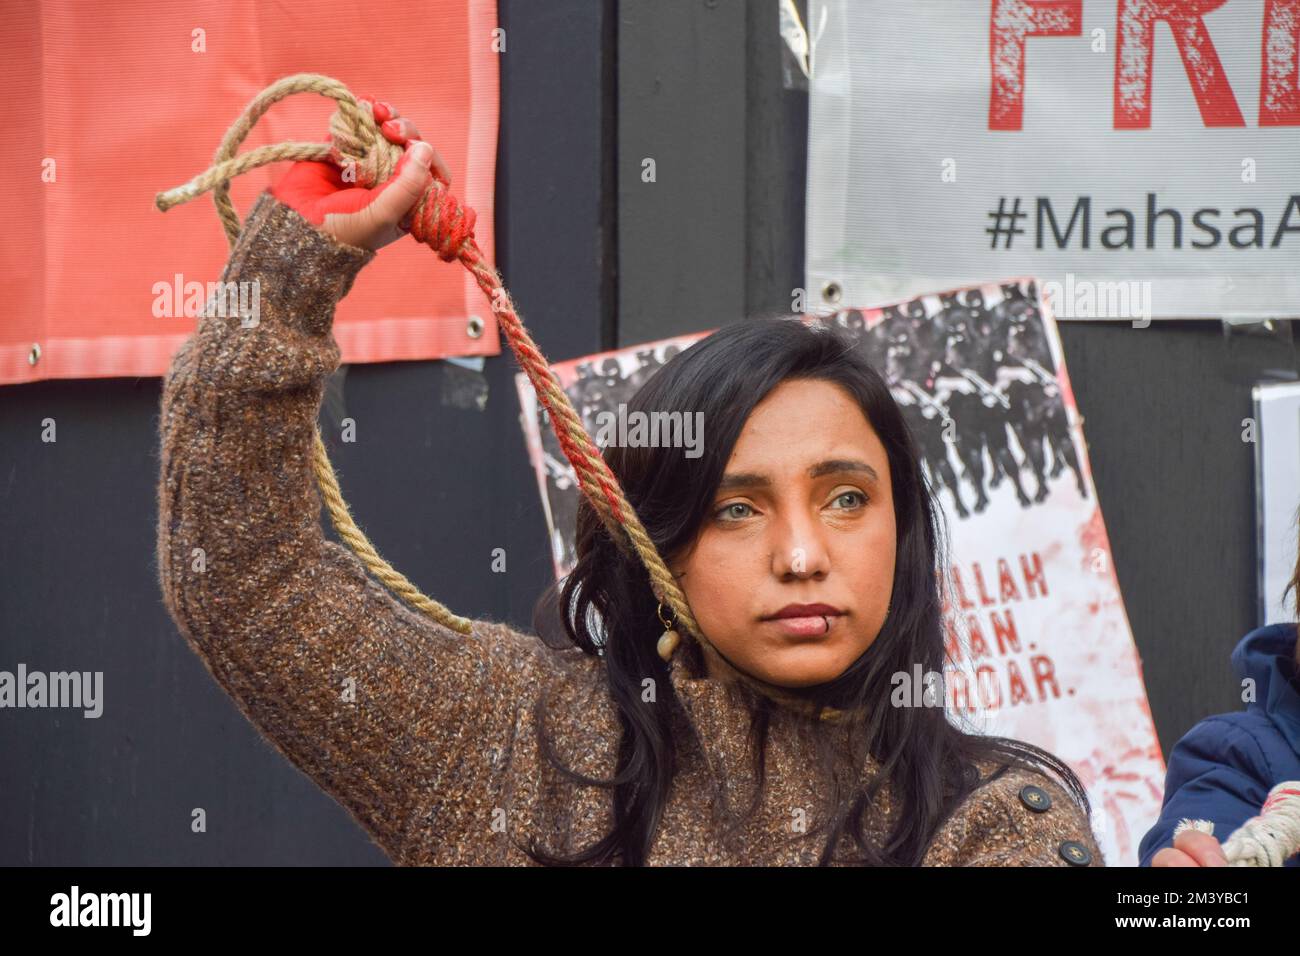 London, UK. 17th December 2022. A group of women staged a demonstration and performance in Piccadilly Circus in protest against the reported executions of anti-government protesters in Iran. The activists tied ropes around their necks and covered their hands in fake blood. Credit: Vuk Valcic/Alamy Live News Stock Photo